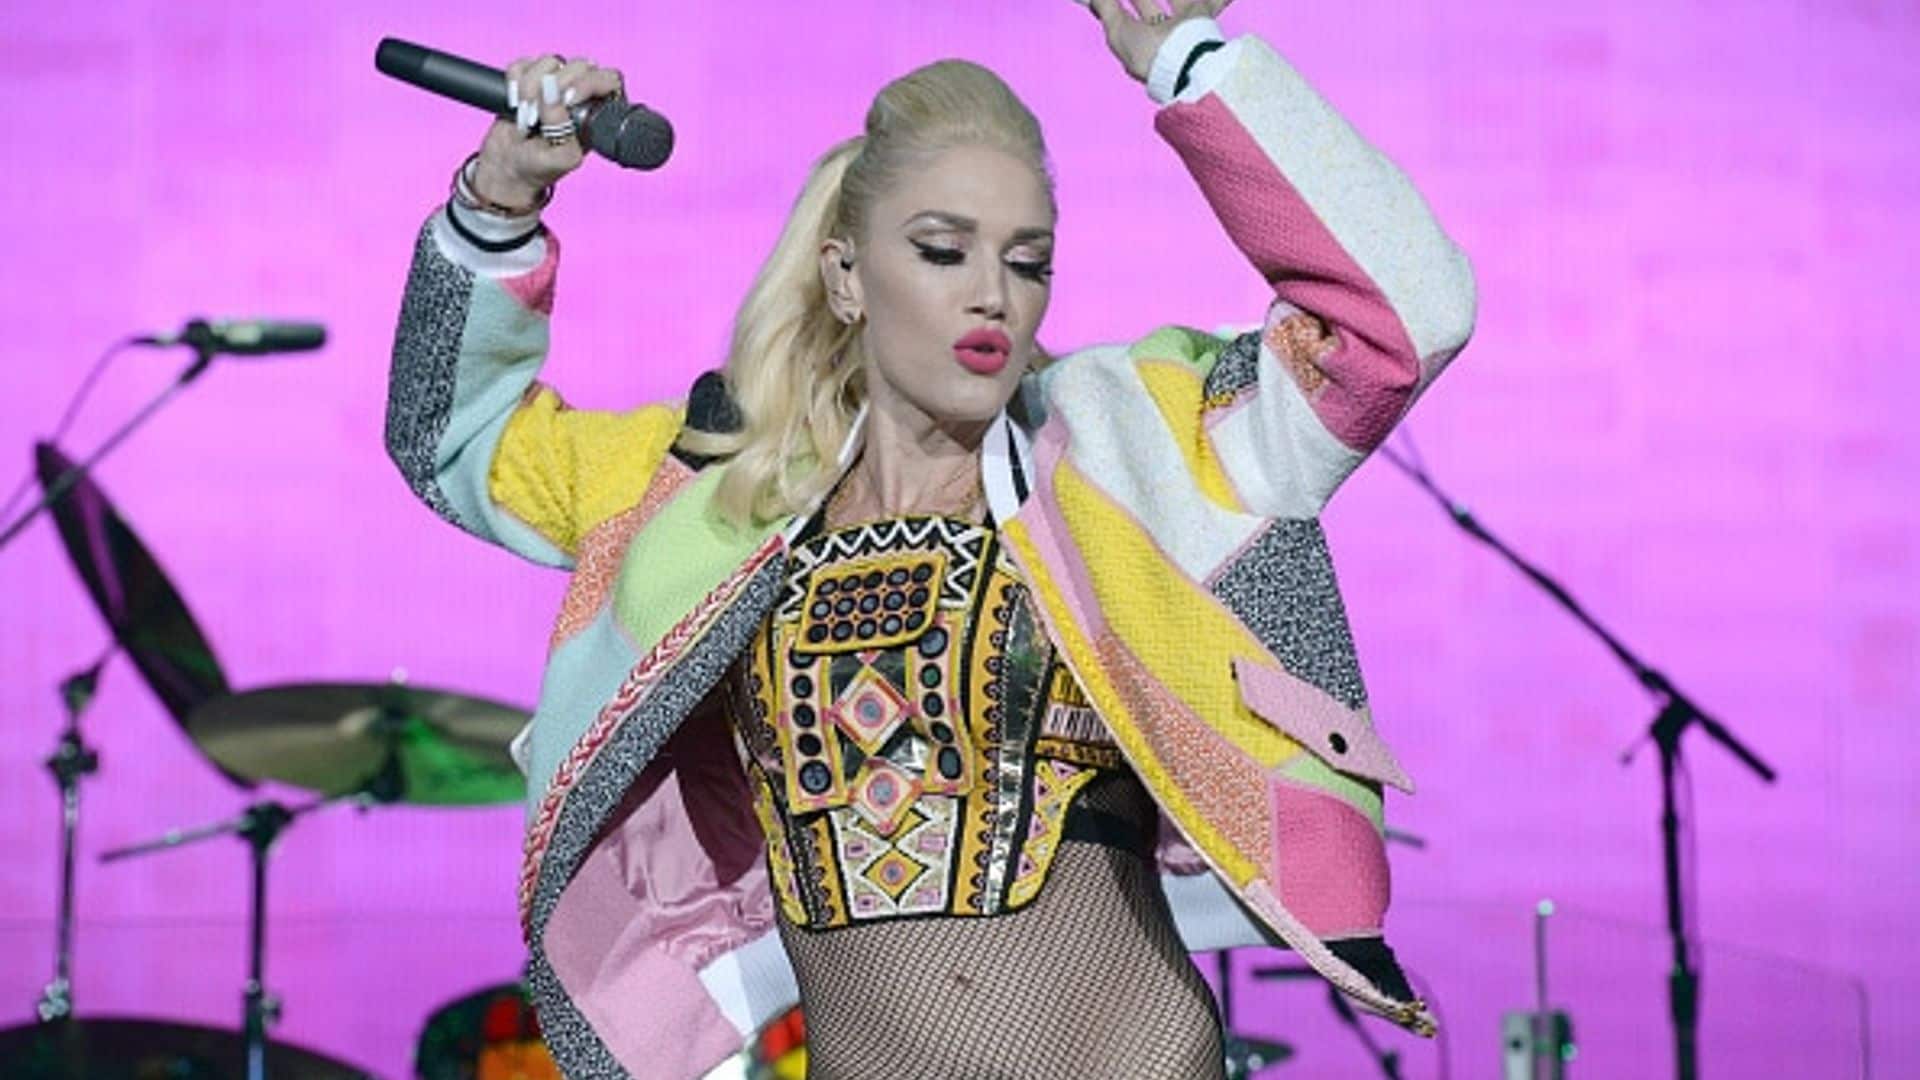 Gwen Stefani teams up with Urban Decay for makeup we'll all want to wear